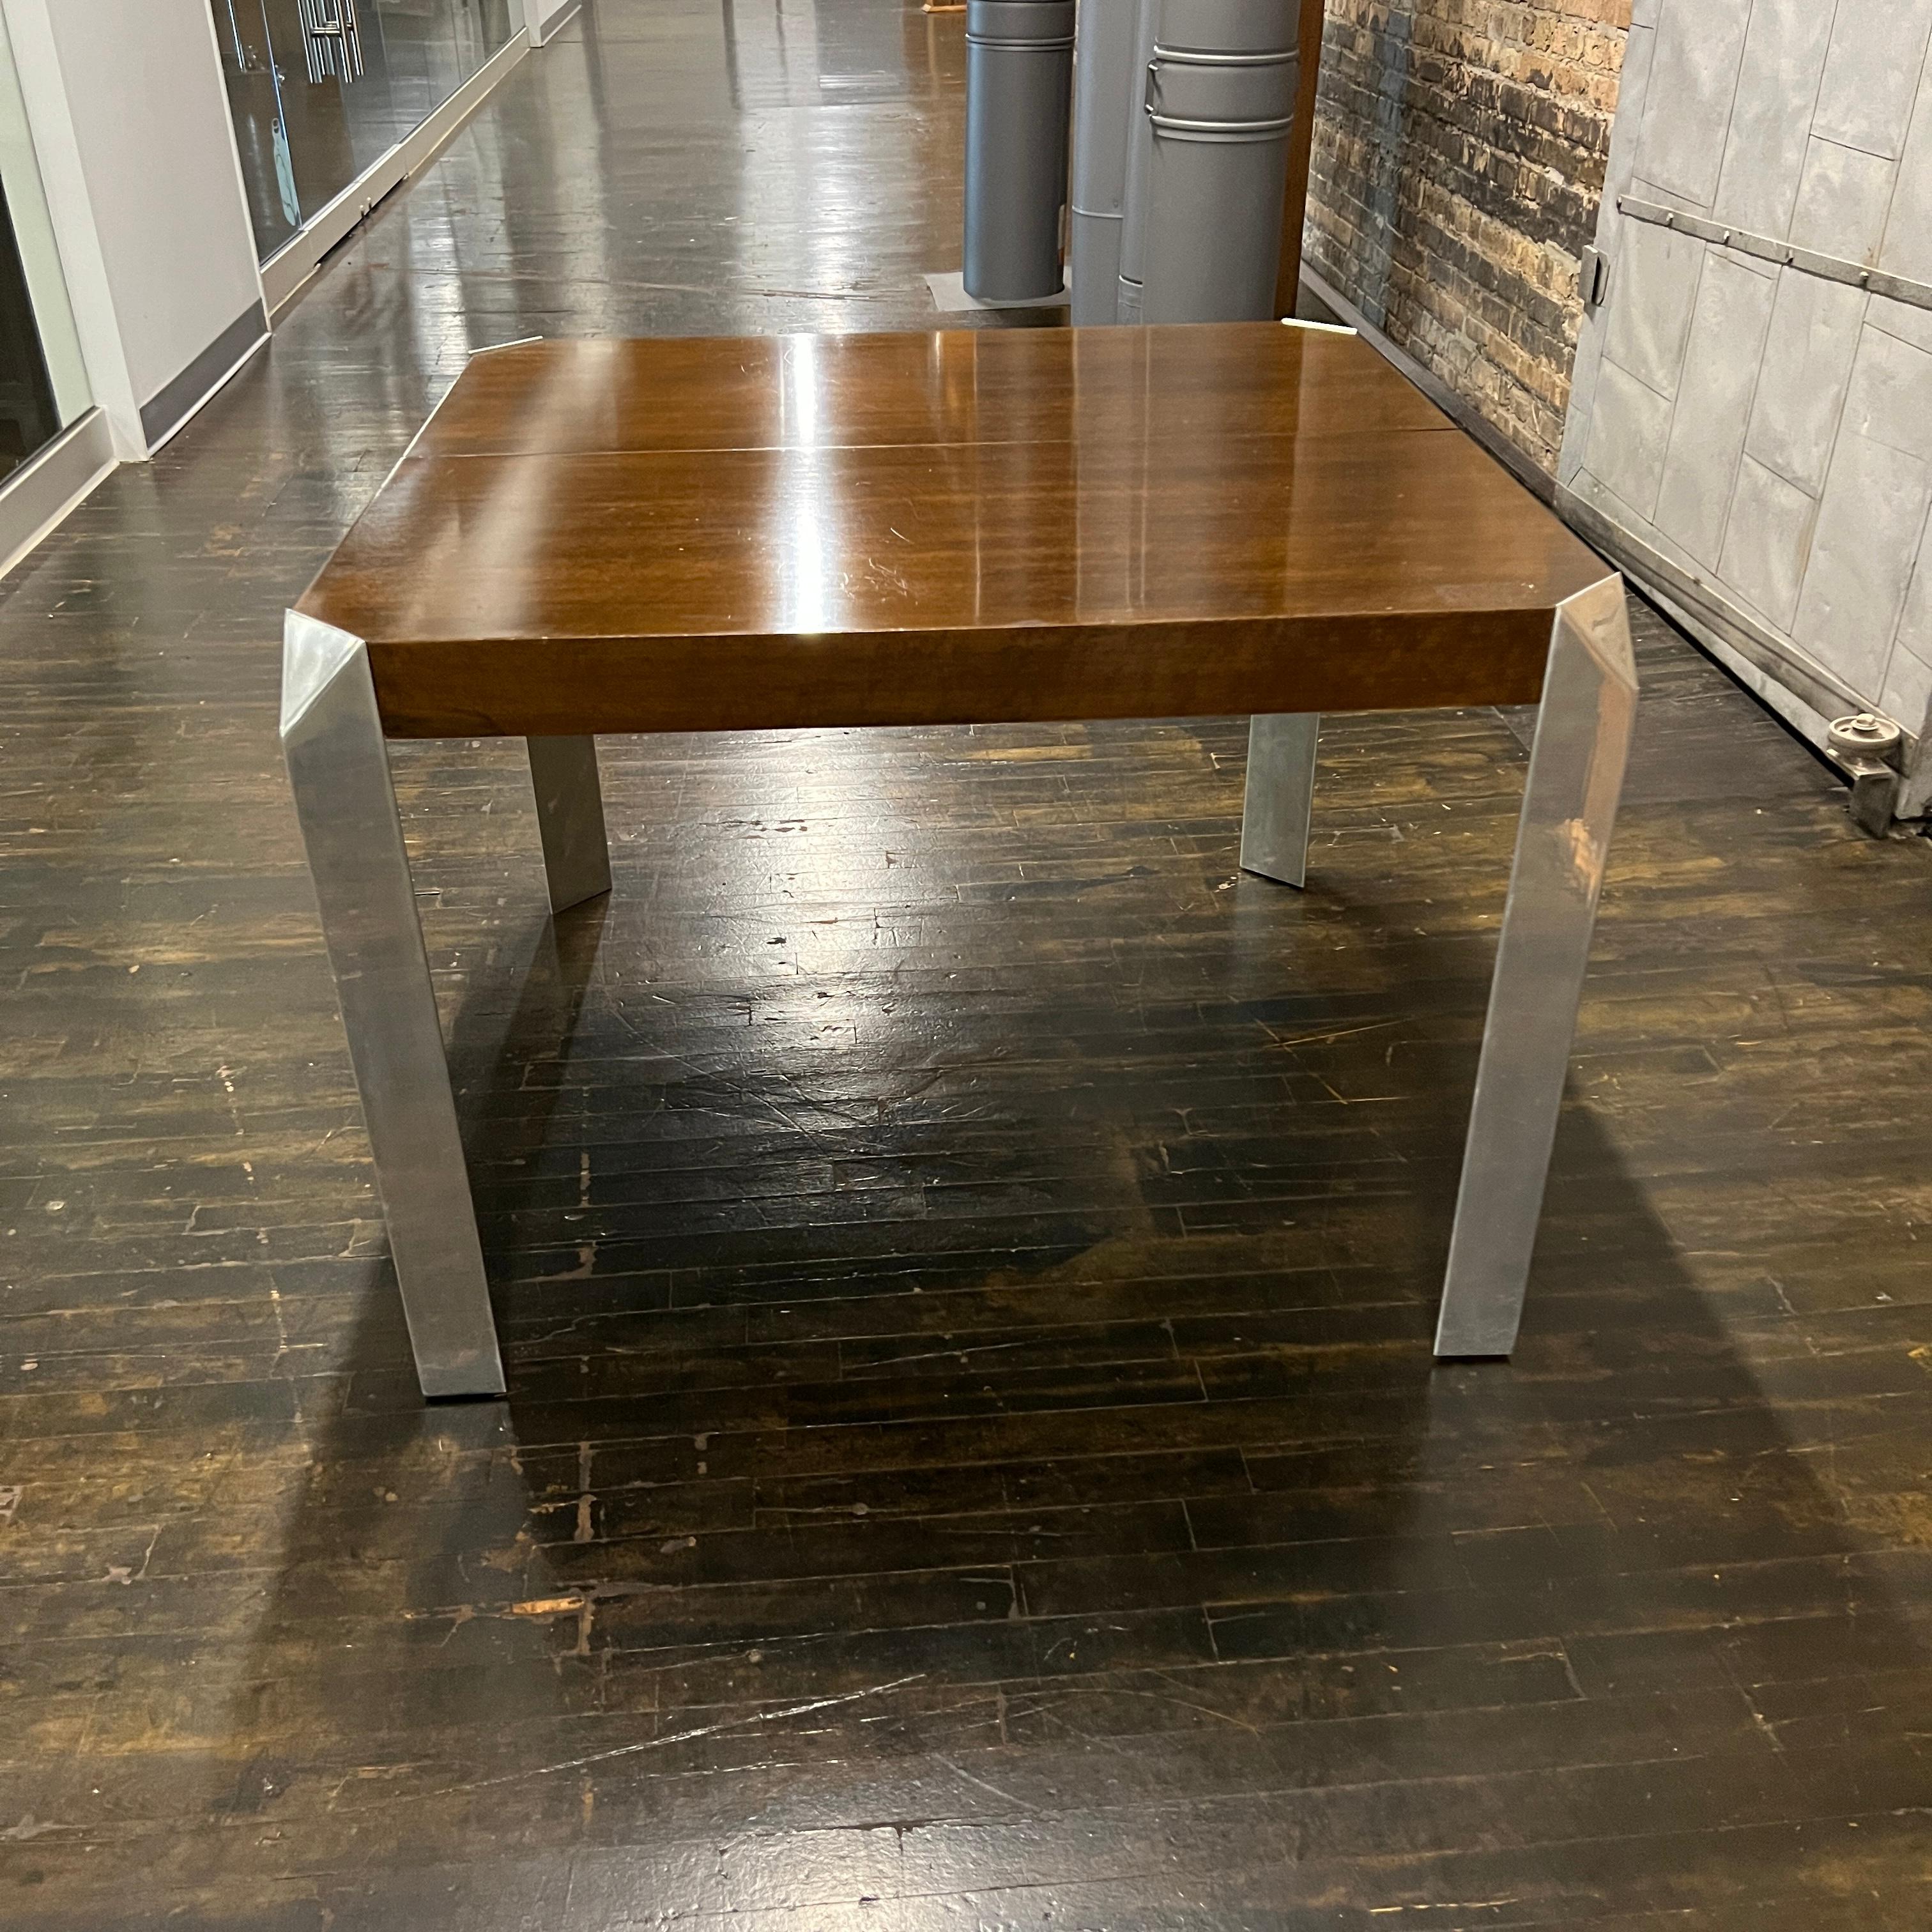 Stunning and unique mid-century dining table by Baker Furniture that features a rich brown wood top and triangular shaped polished chrome legs (that add an architectural element to the piece).  The table starts out as a square (40